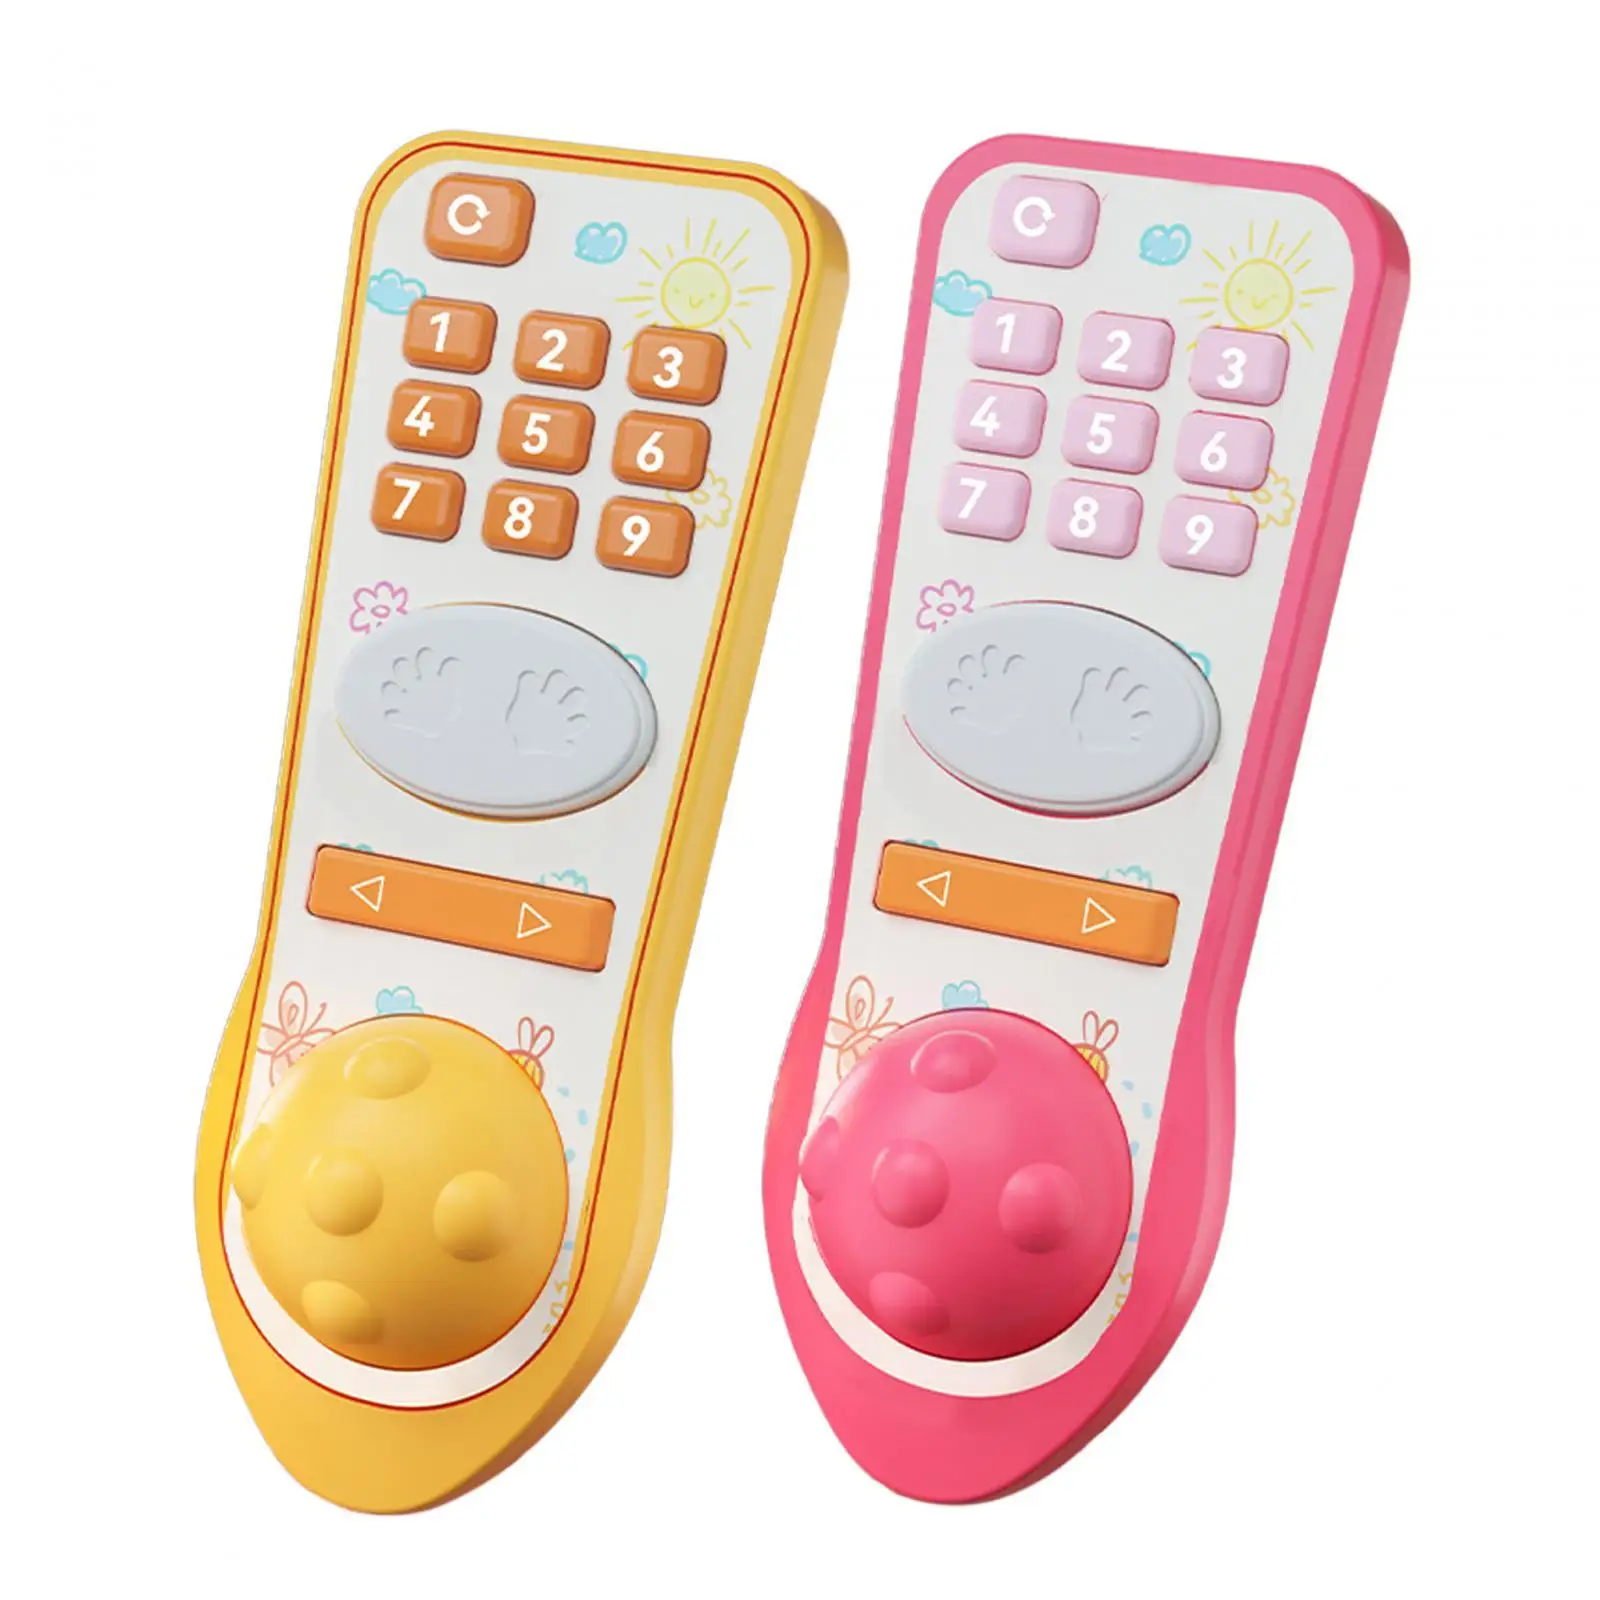 Musical TV Remote Control Toy Fun Remote Toy for 6 to 12 Months Boys Girls